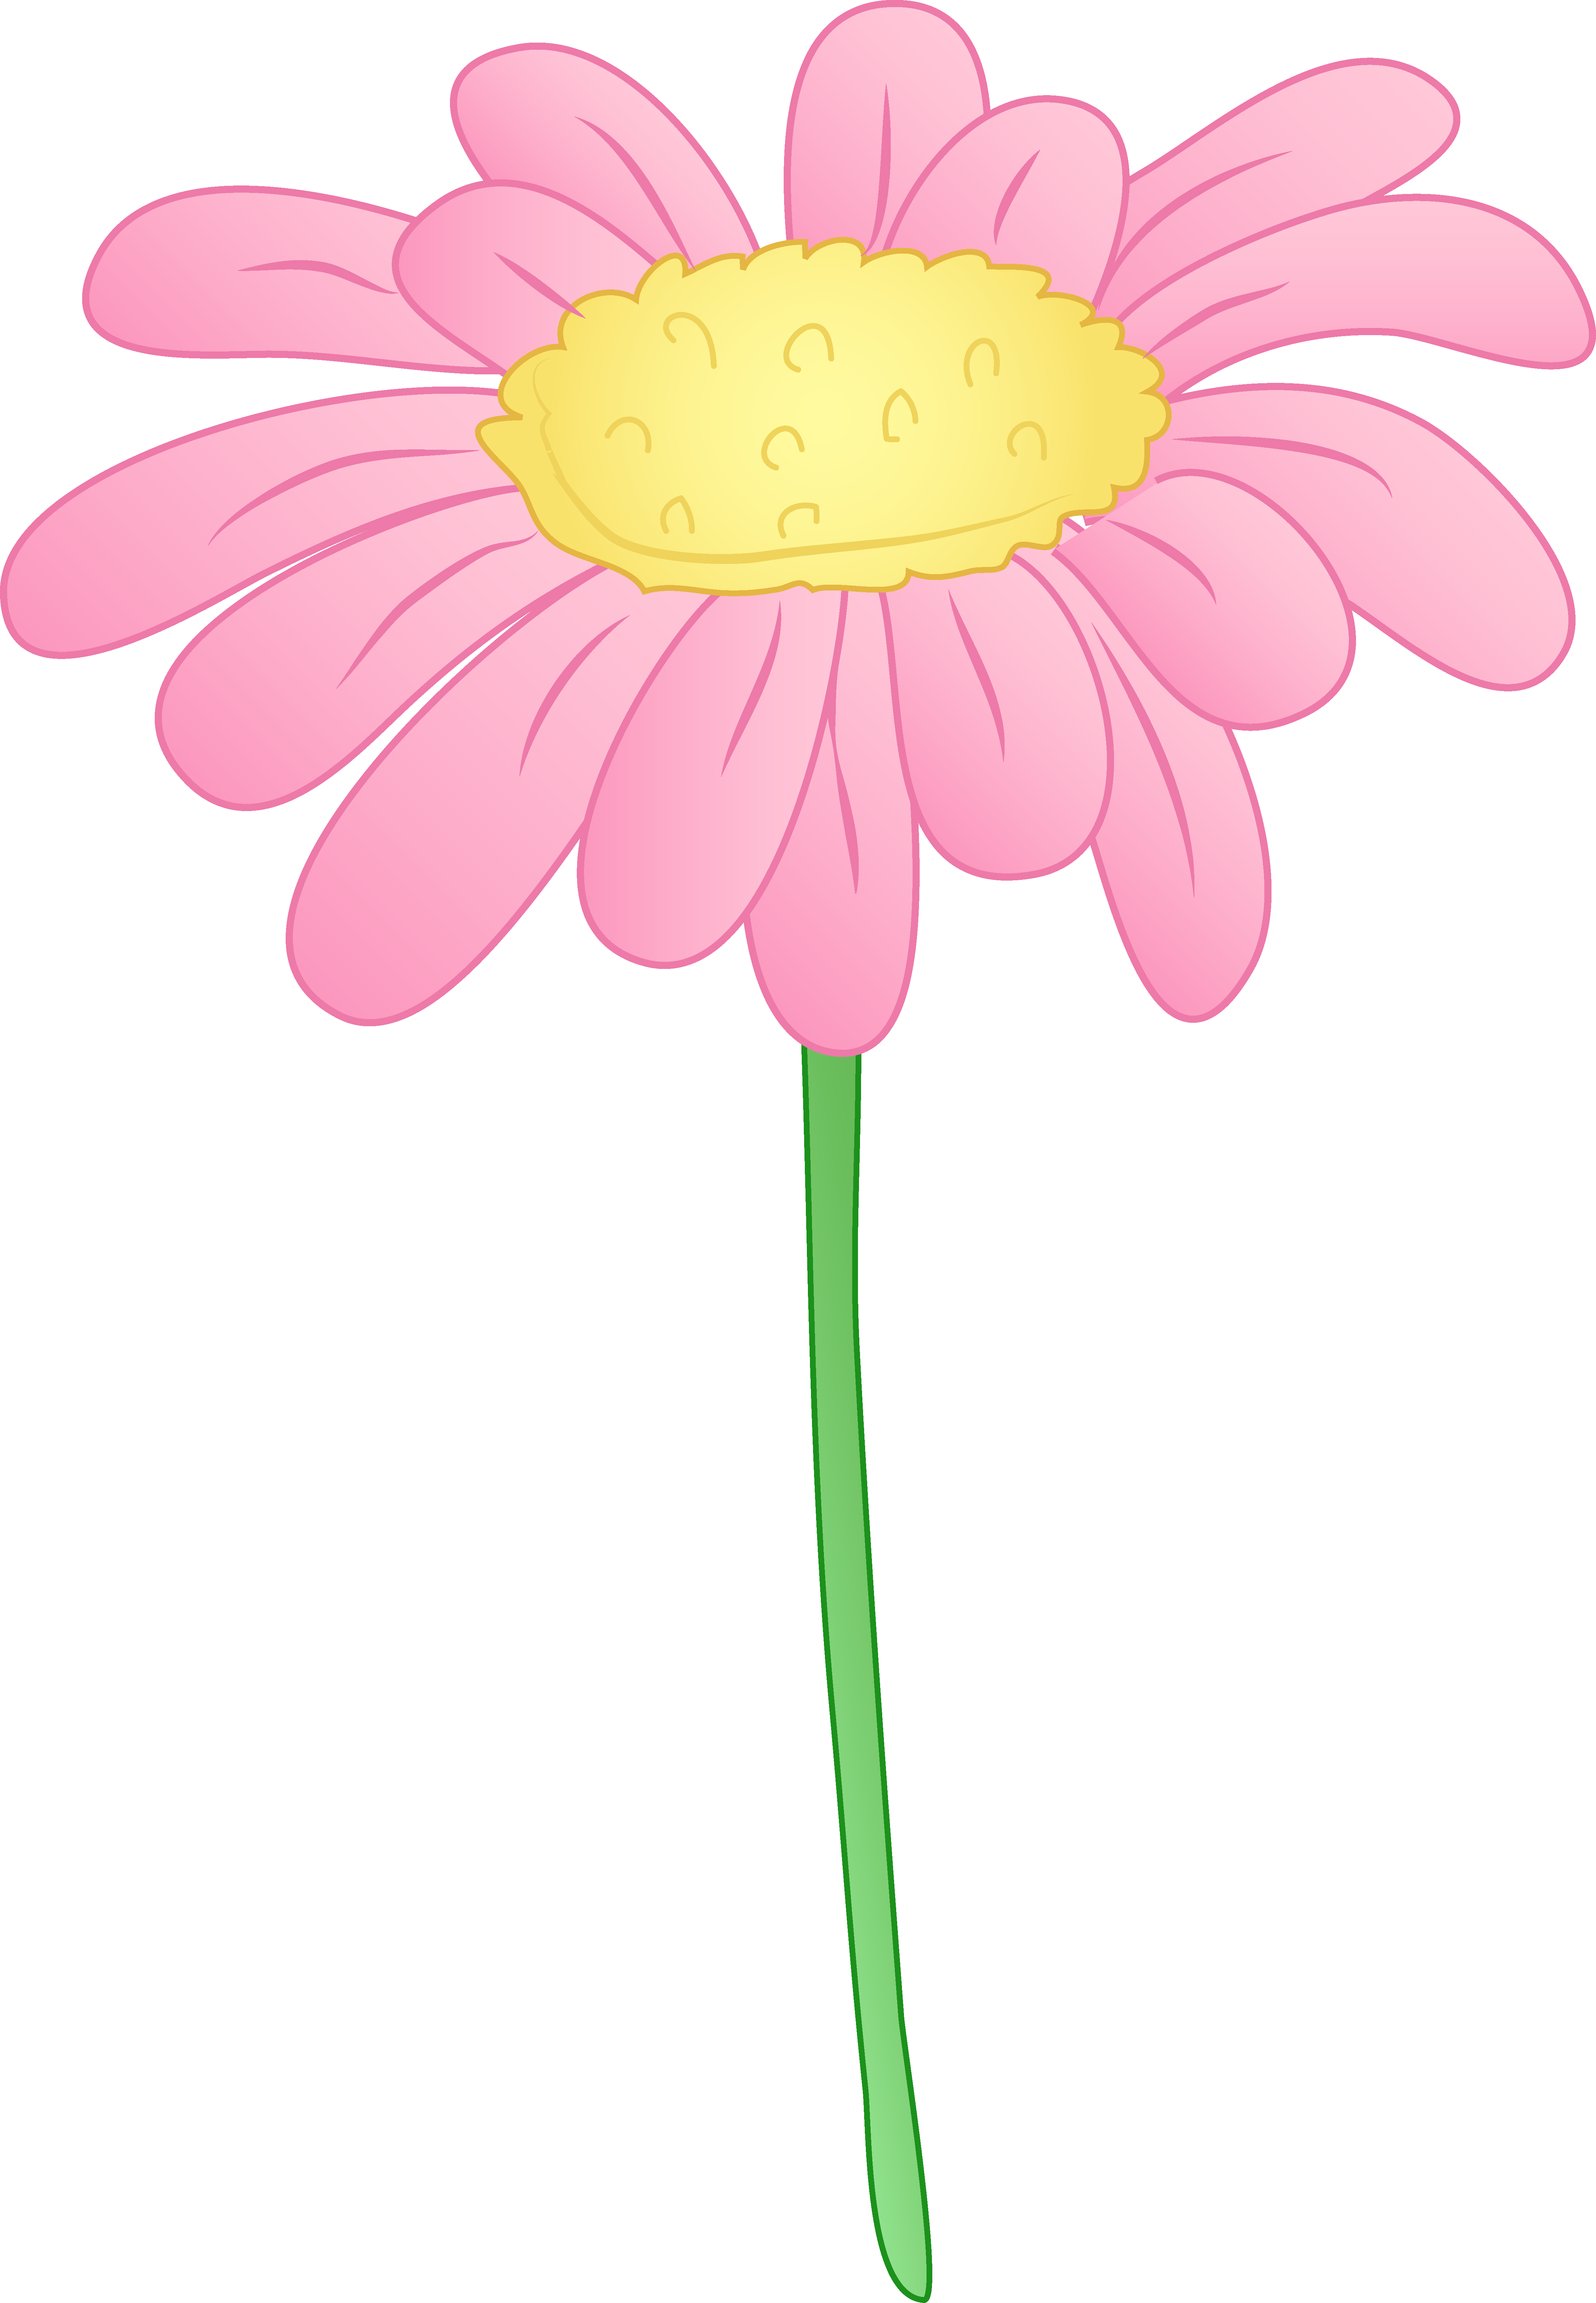 Daisy Clip Art Without A Background Color | Clipart Panda - Free ...